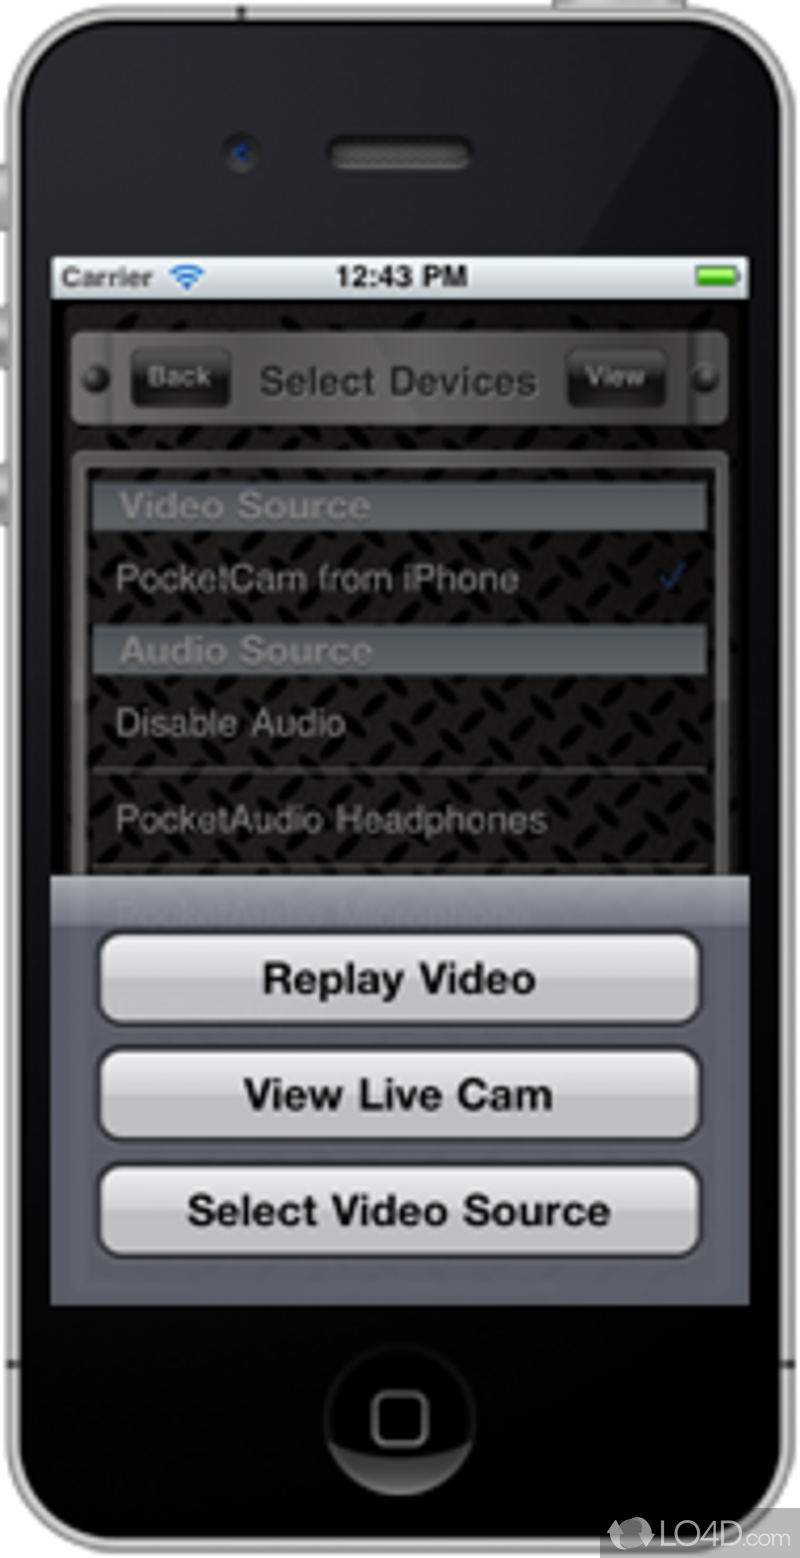 Software app to view a live video stream from computer on smartphone, be it iPhone - Screenshot of Air Cam Live Video